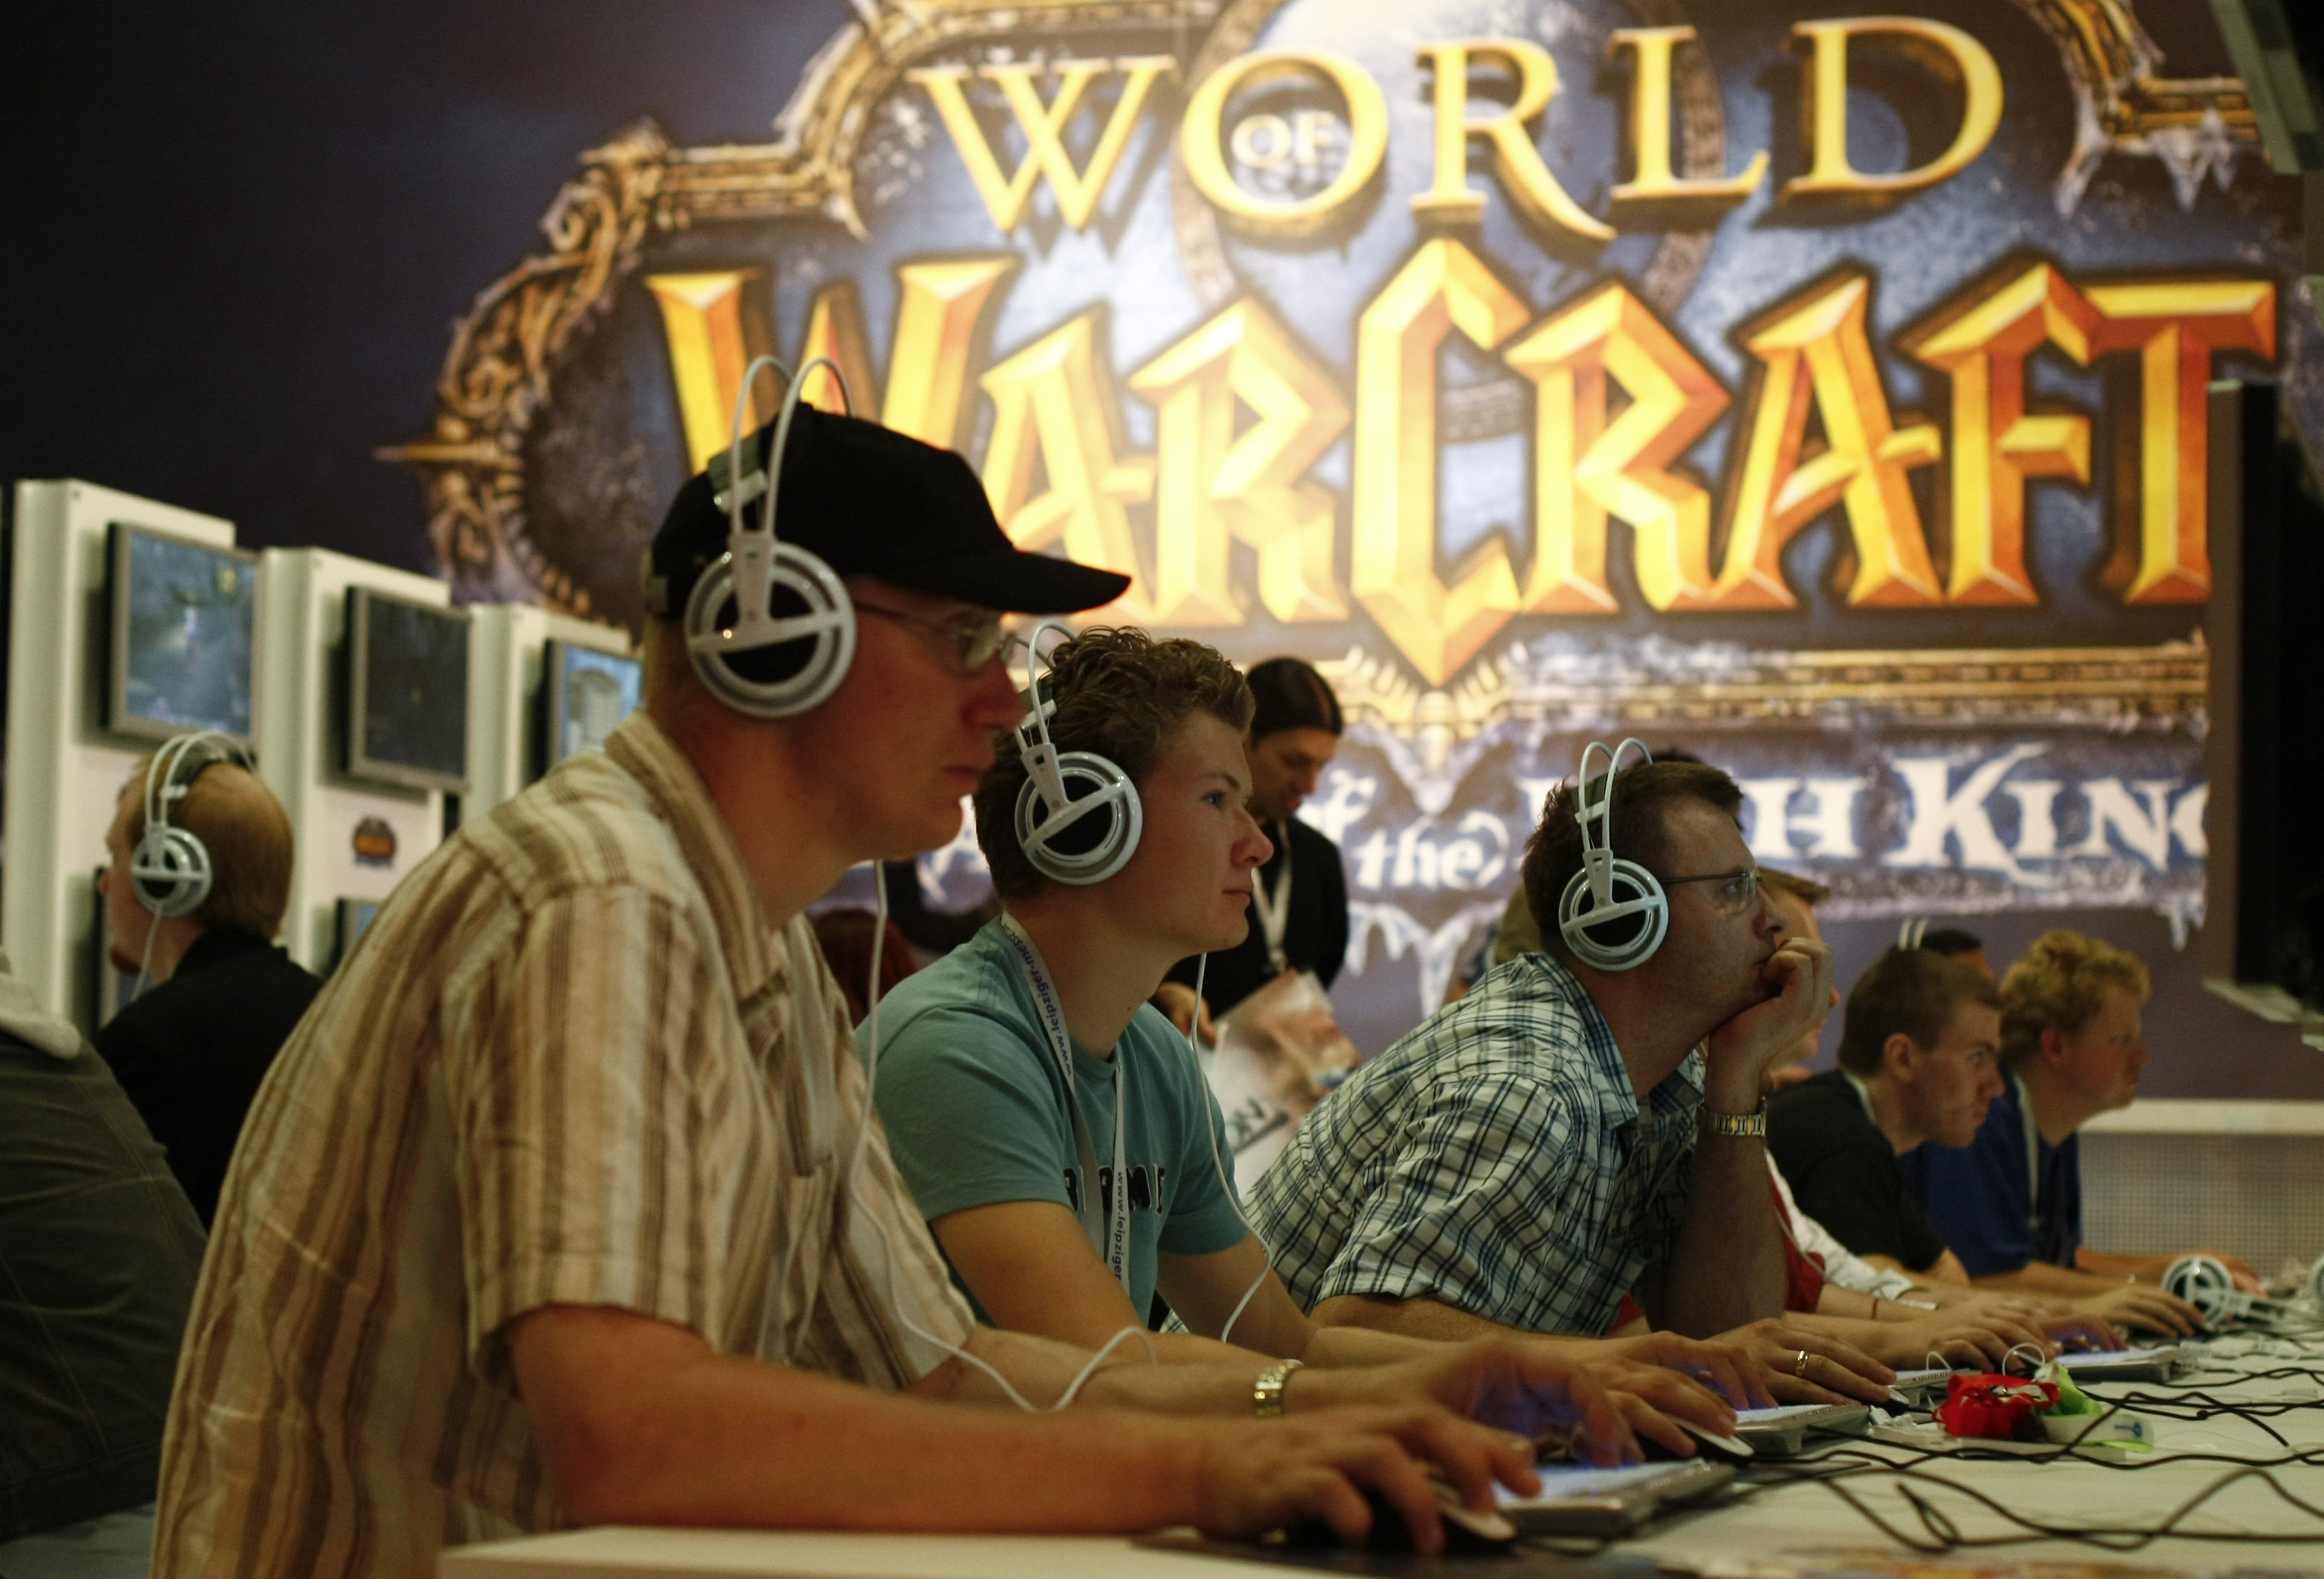 NSA Infiltrated “World Of Warcraft”